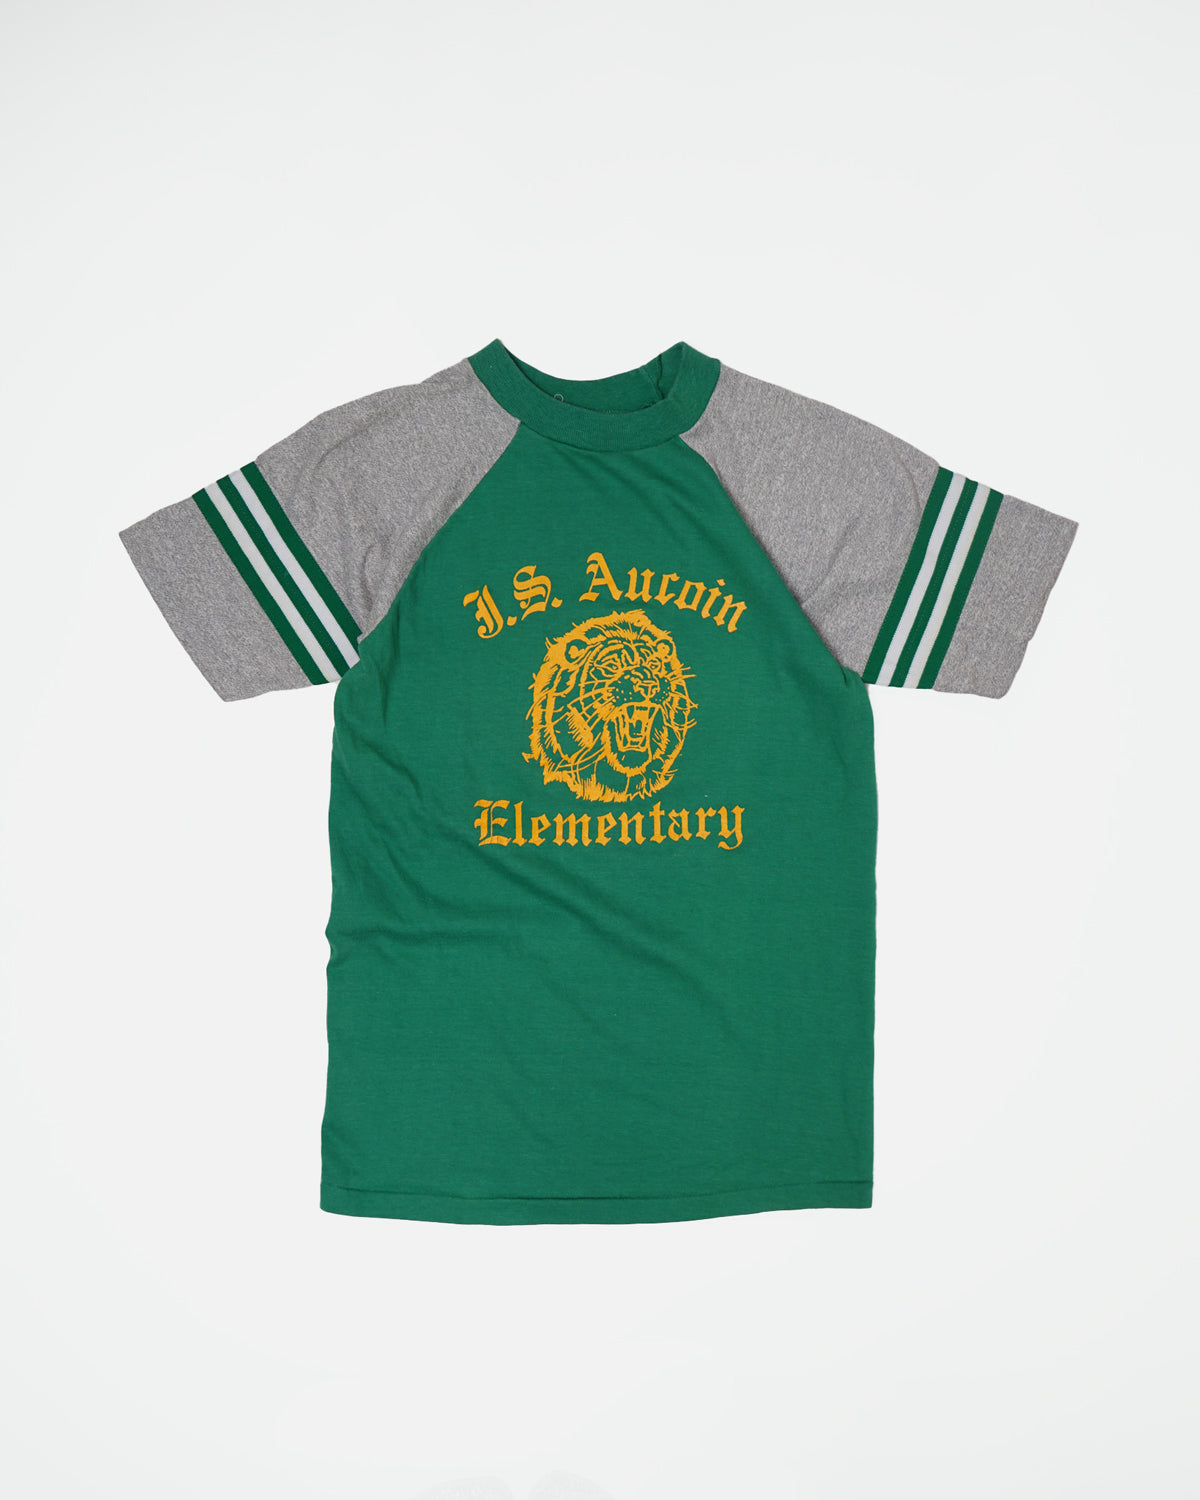 Graphic Tee / J.S. Auroin Elementary